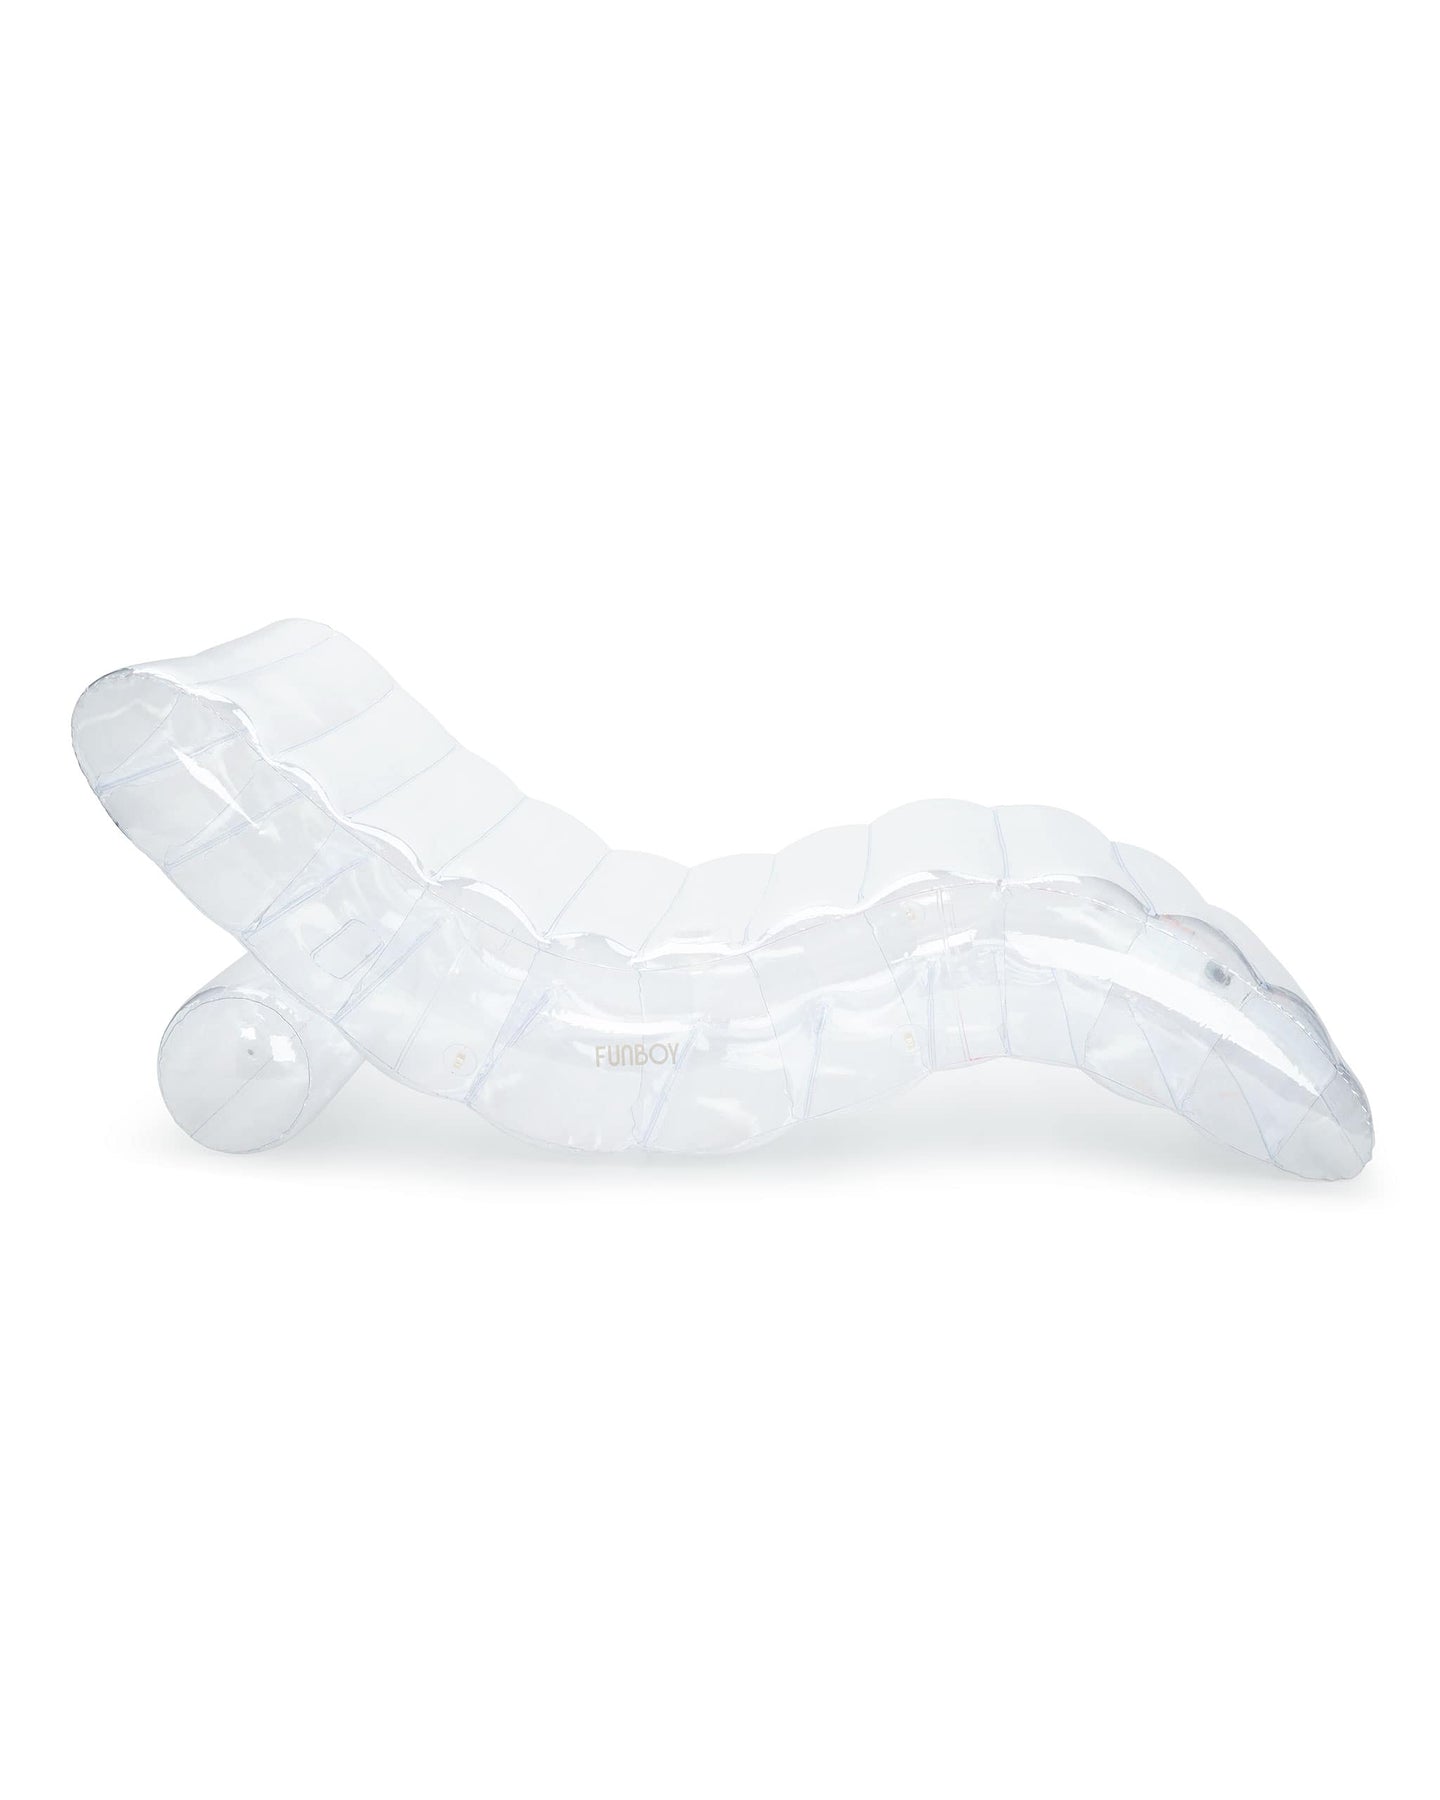 Best Pool Floats - Super Clear Chaise Lounge